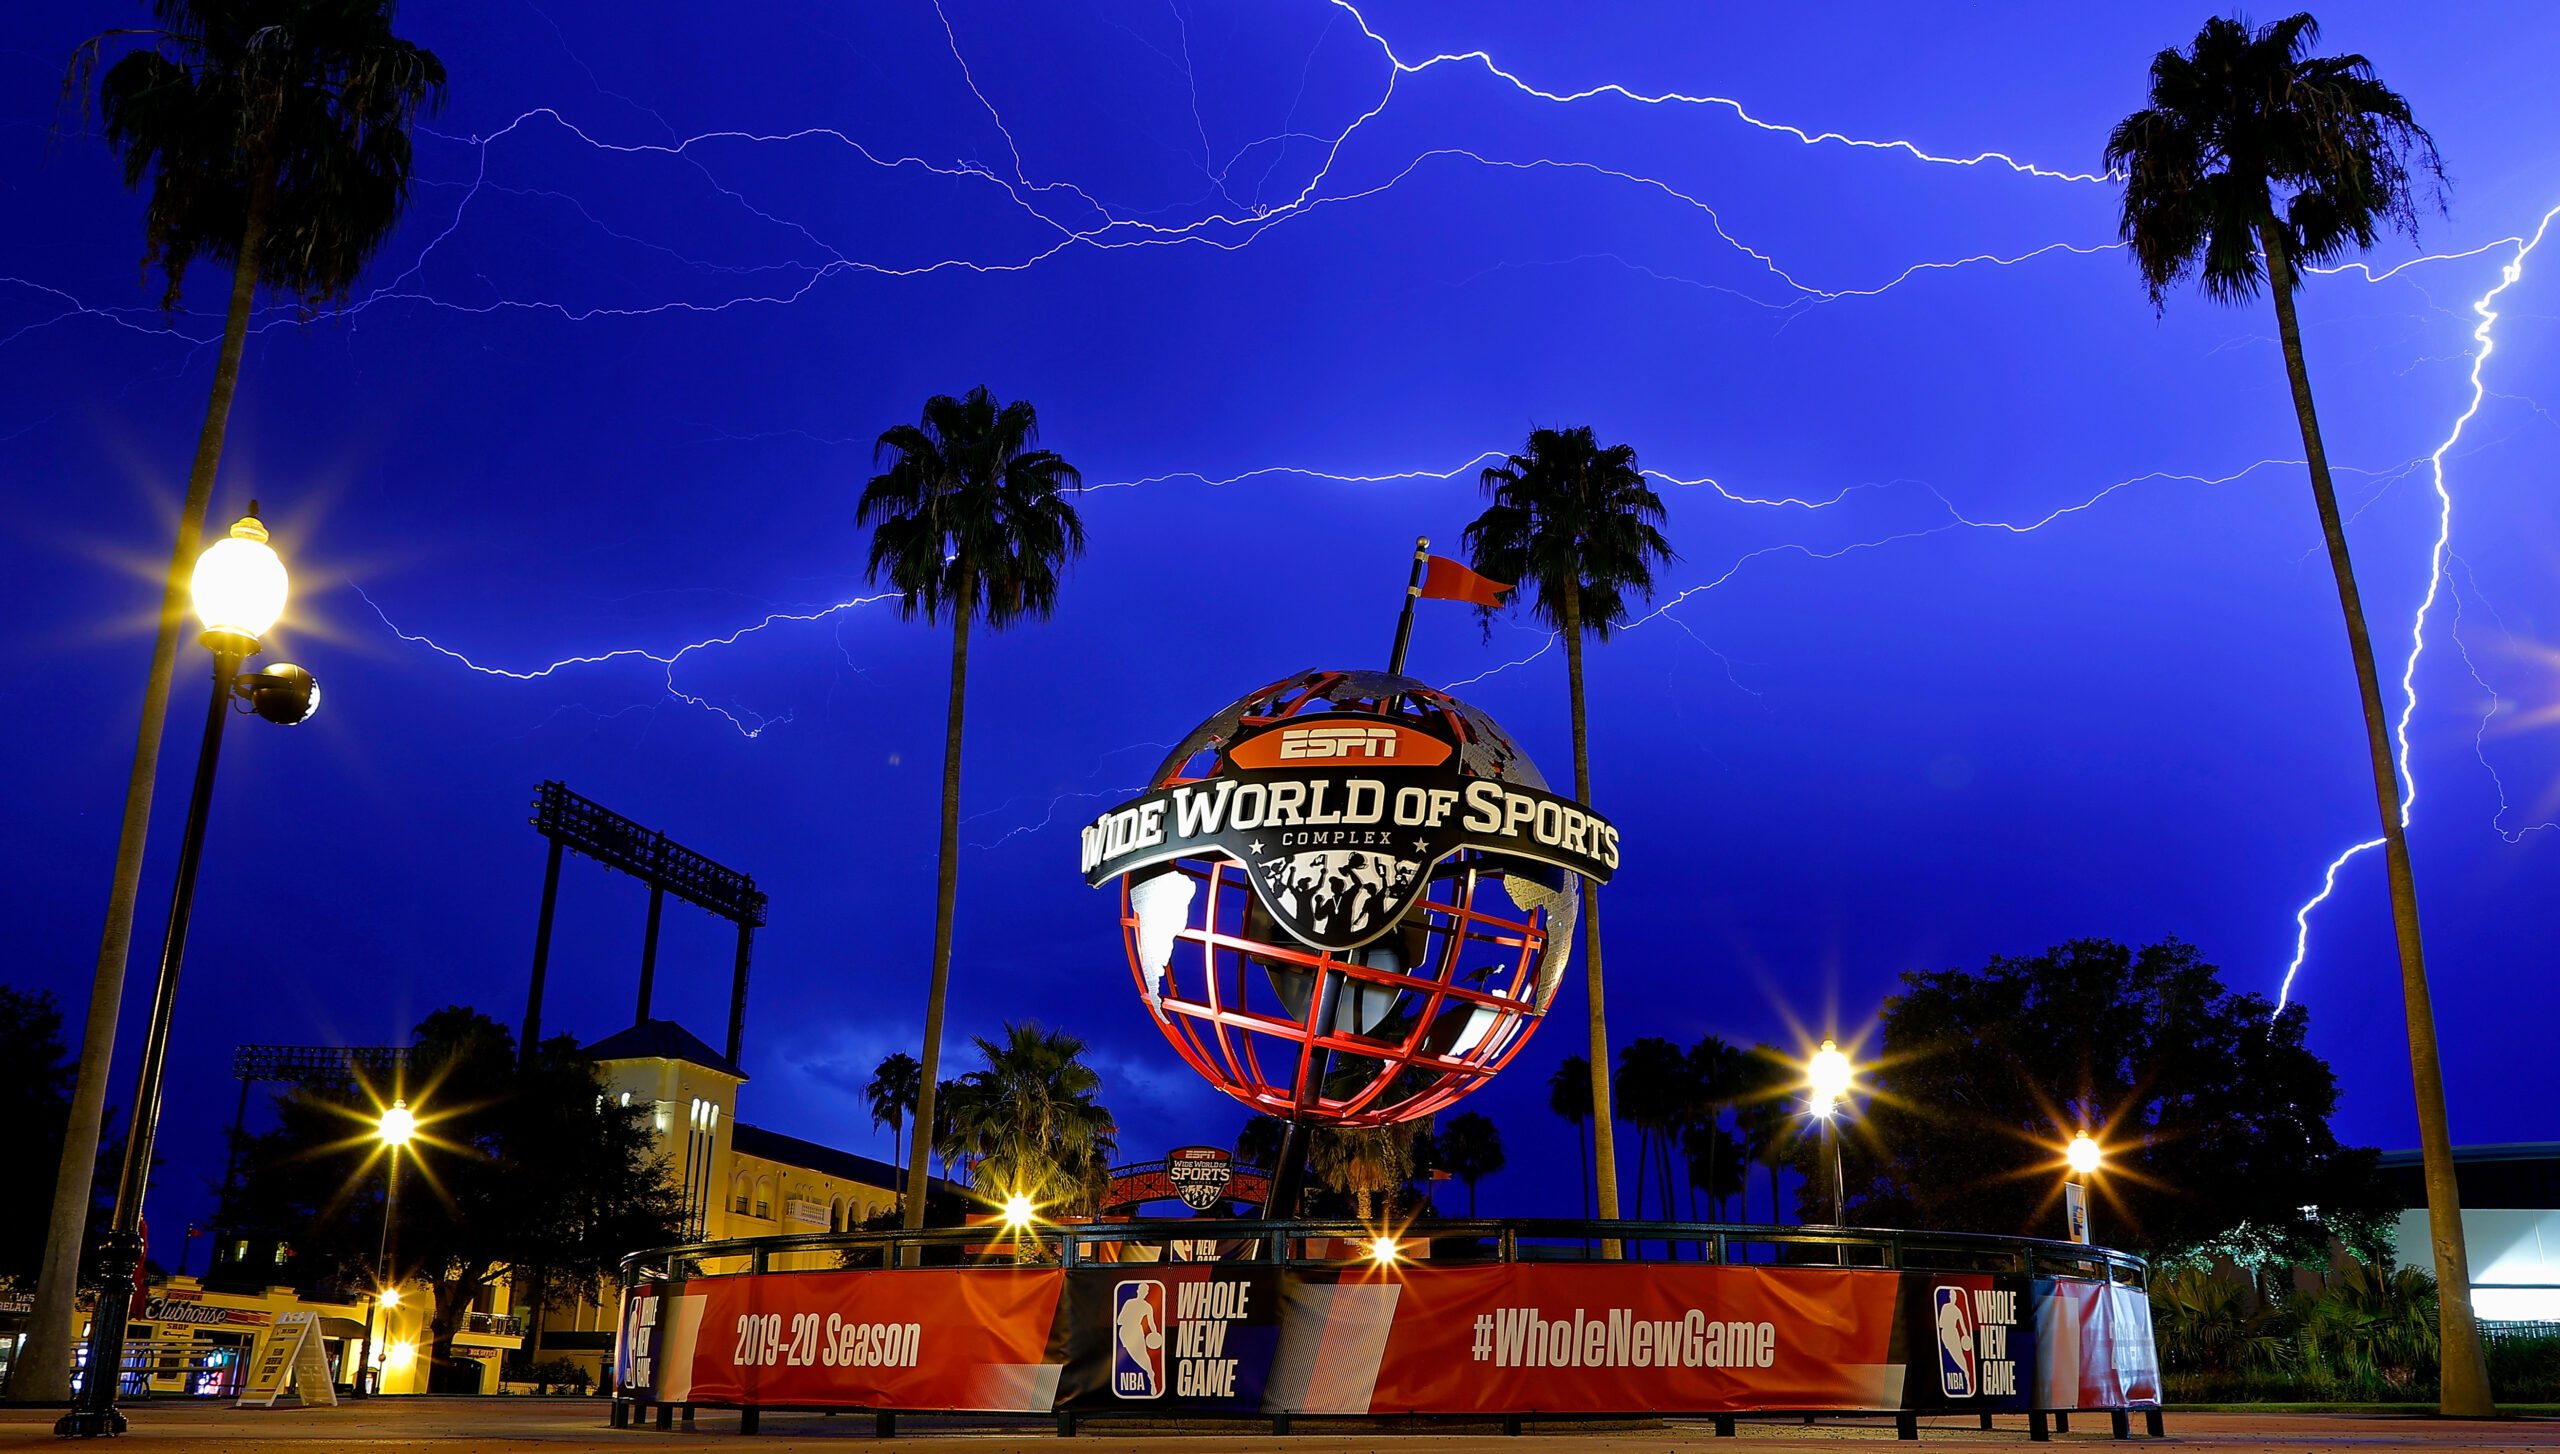 ESPN Wide World of Sports at Disney sports complex for the 2019-20 basketball season